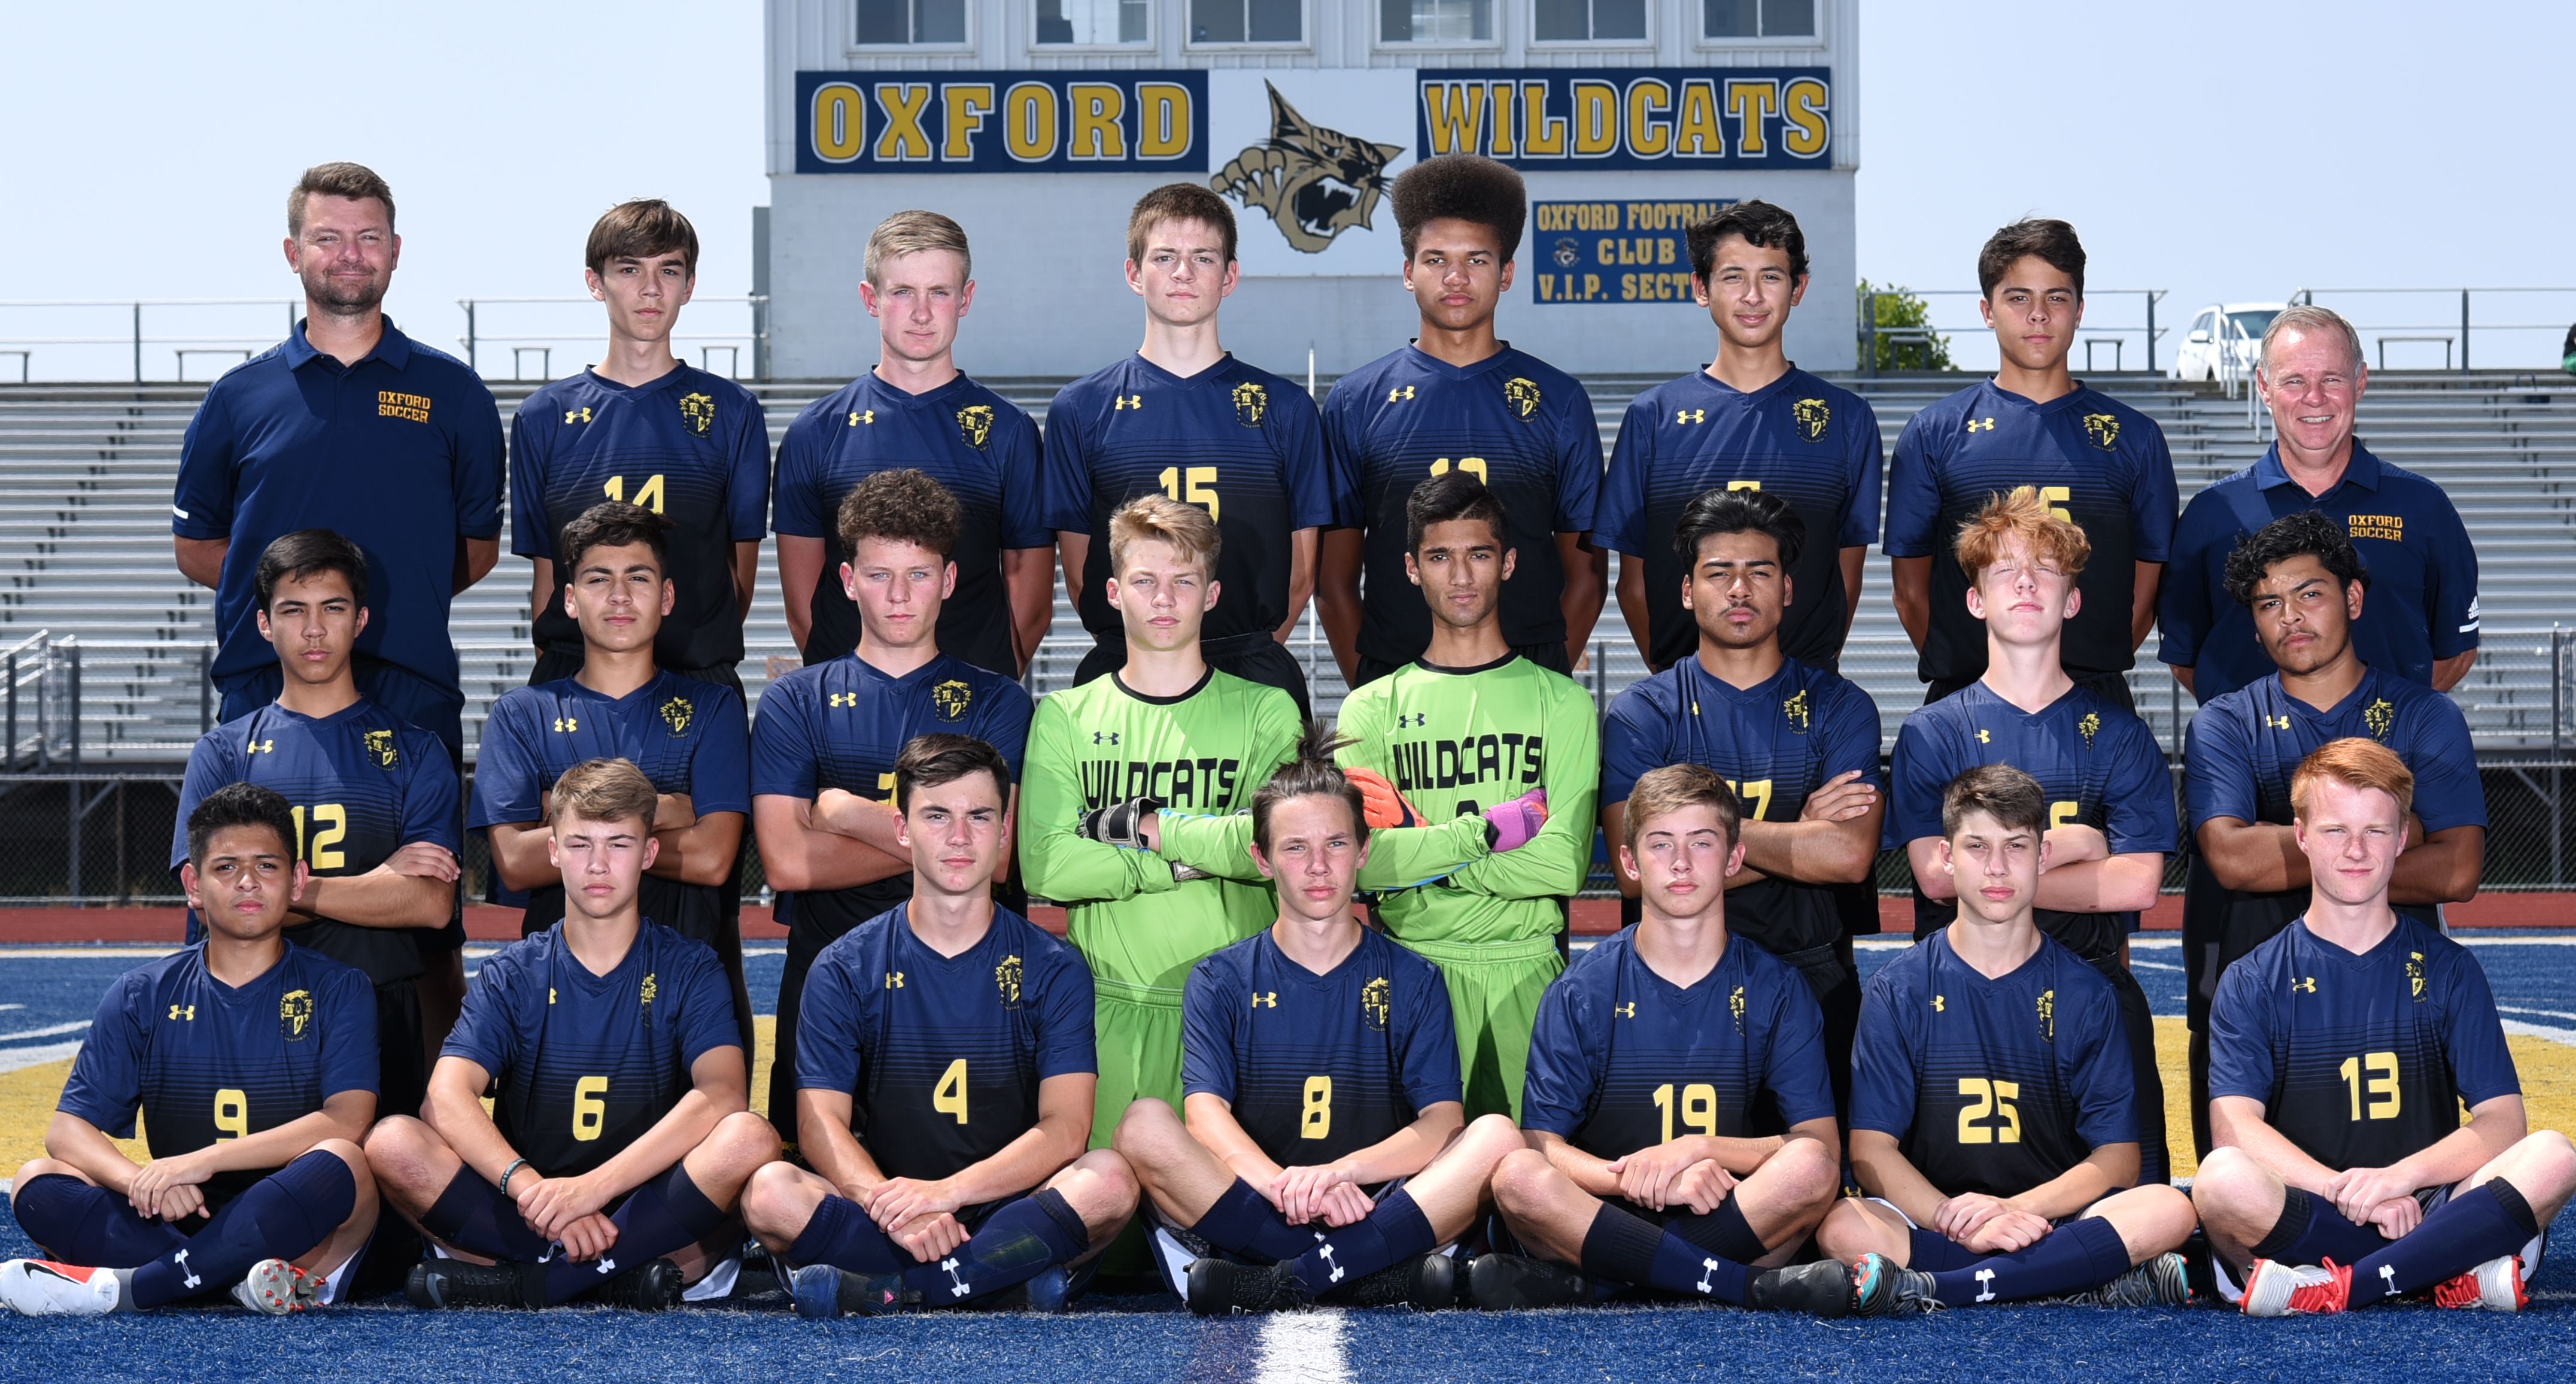 Front row (from left: Bryan Calixto, Dylan Brown, Nicholas Morawski, Mason Upham, Luke Huller, Colin Deroso andCavan Vance. Middle row (from left): Christian Mendoza, Christopher Escalante, Matthew Wolfe, Tristan Bennett, Zain Khambaty, Michael Gonzales, Rory Vince and Mario Palacios. Back row (from left:  JohnThaler, Pedro Bottene, Sam Huller, Brent Bayley, Zachary Townsend, Jesus Escalante, Coda Mendoza and Barrie Vince. Photo by Visual Sports Network.